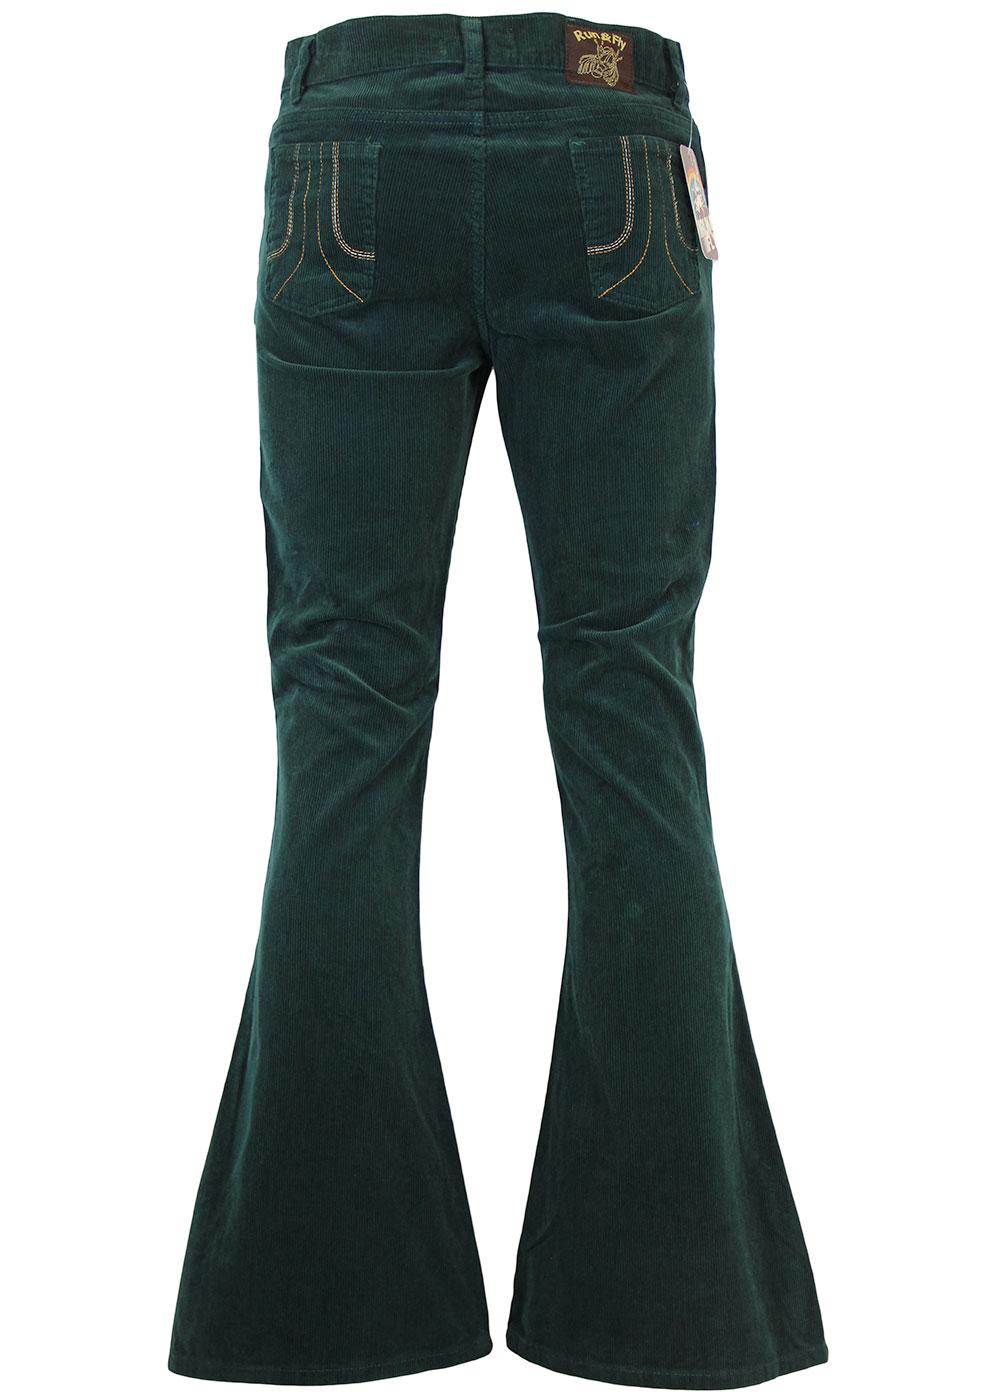 Unreal Teal Retro 1970s Corduroy Bellbttom Flared Trousers